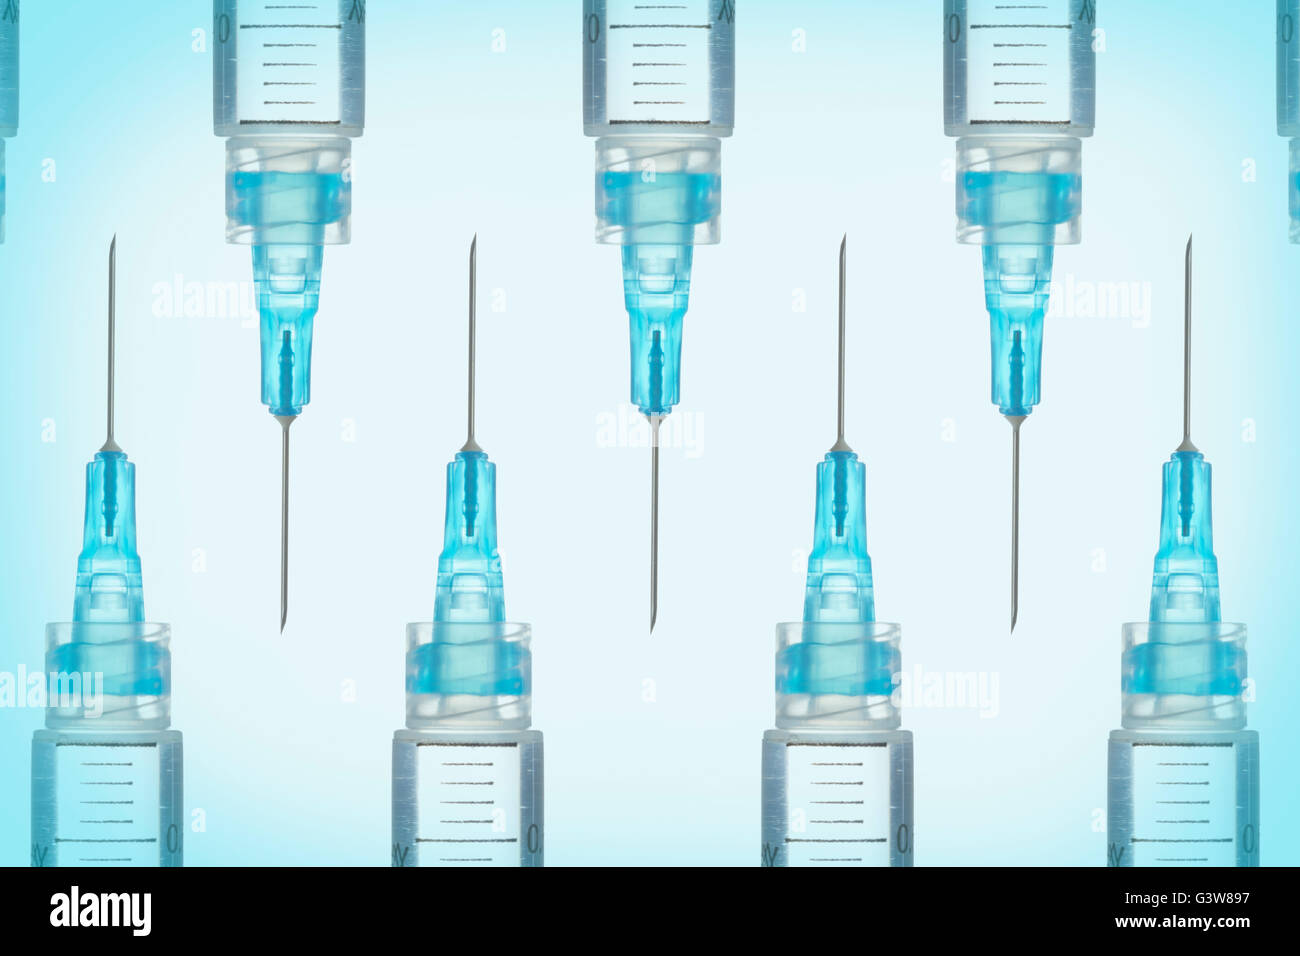 Syringes in row Stock Photo